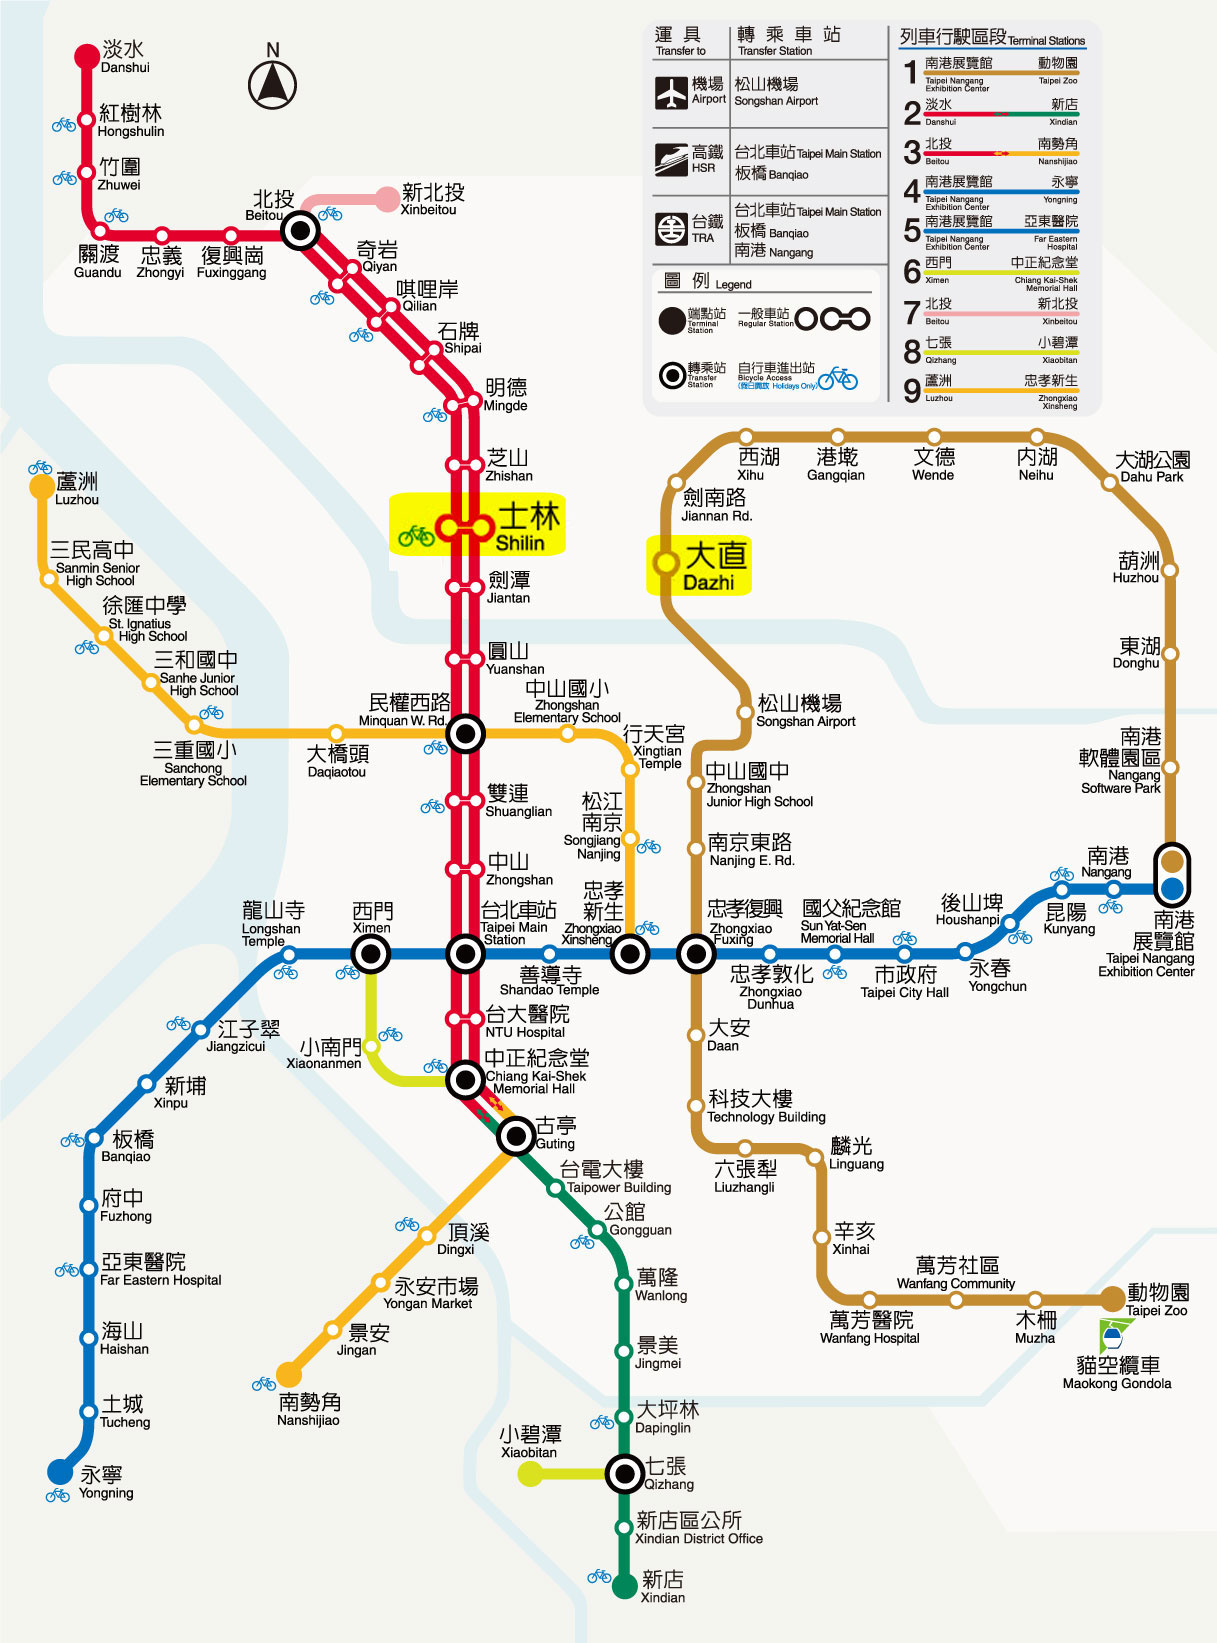 Route Map of MRT